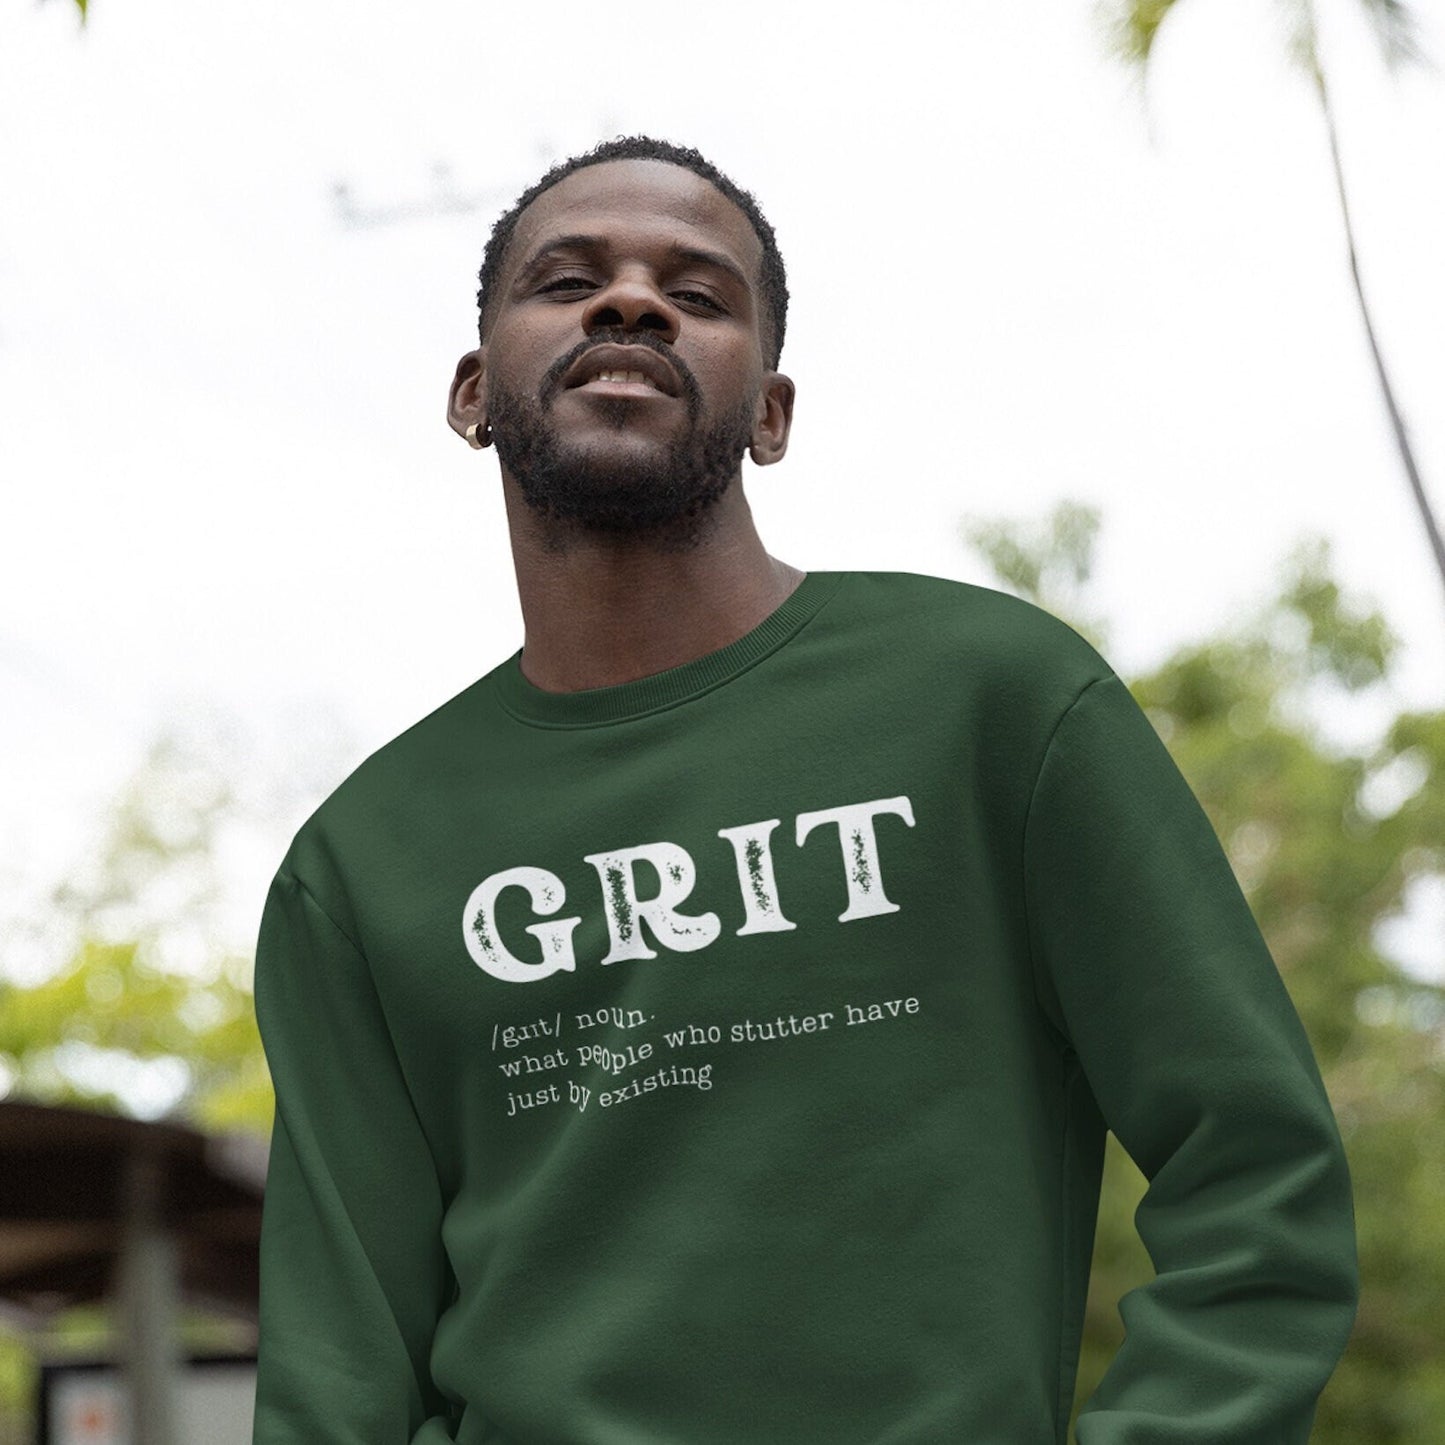 Grit: What People Who Stutter Have Just By Existing Sweatshirt